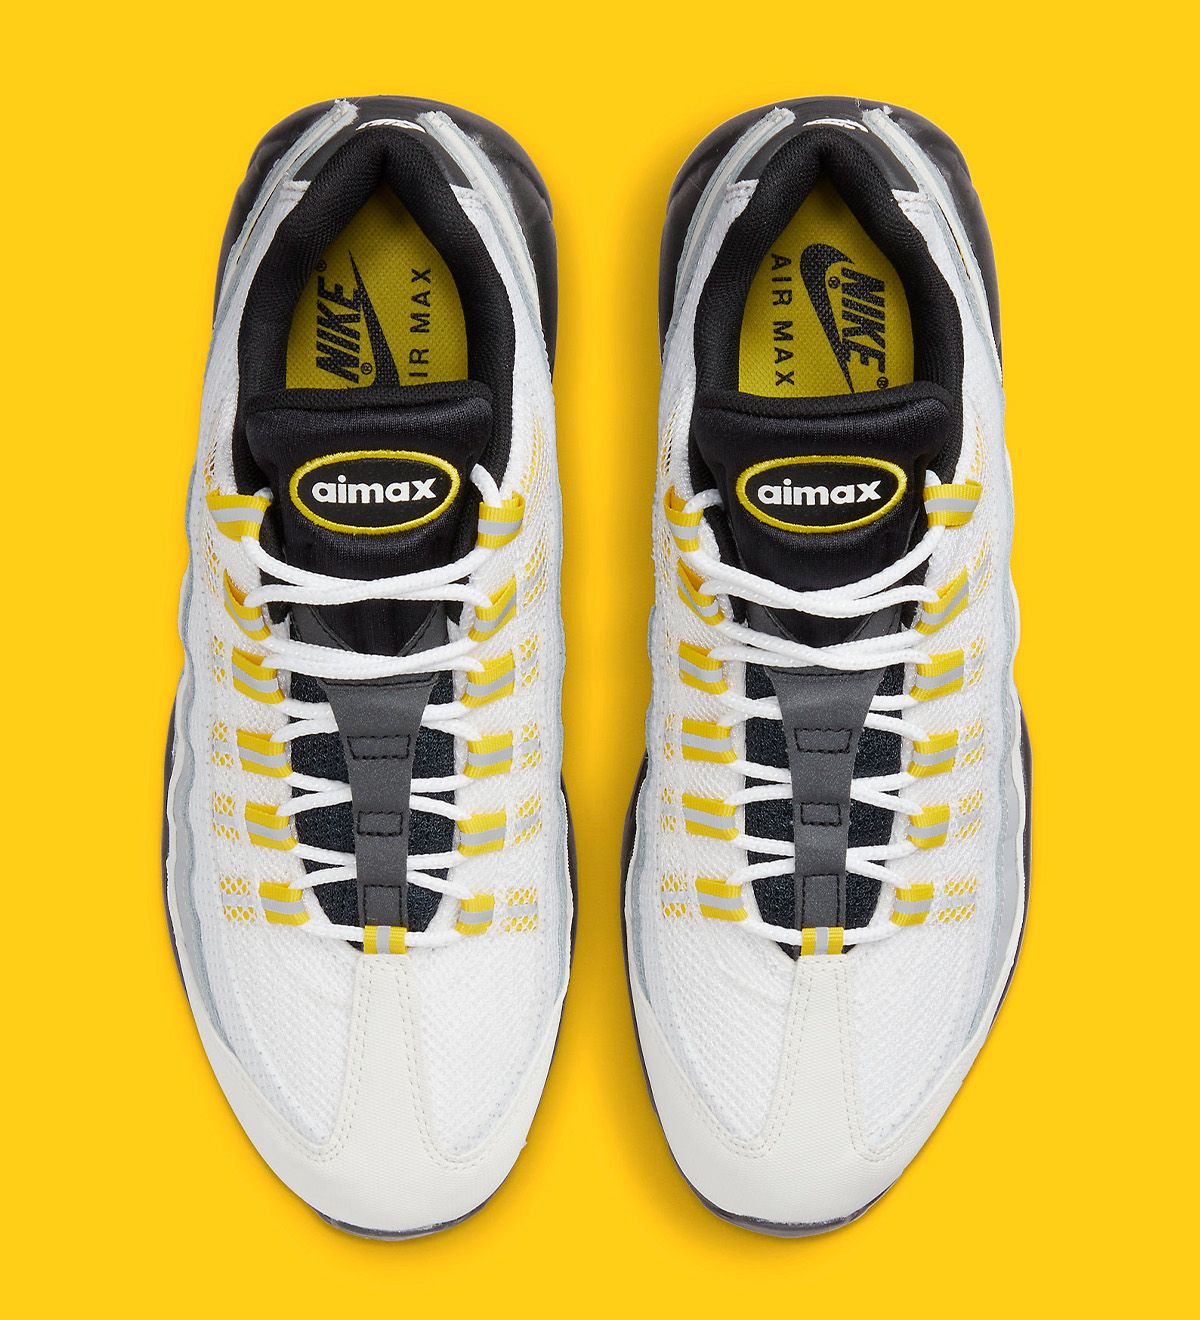 First yellow air max 95 Looks // Nike Air Max 95 "Tour Yellow" | HOUSE OF HEAT